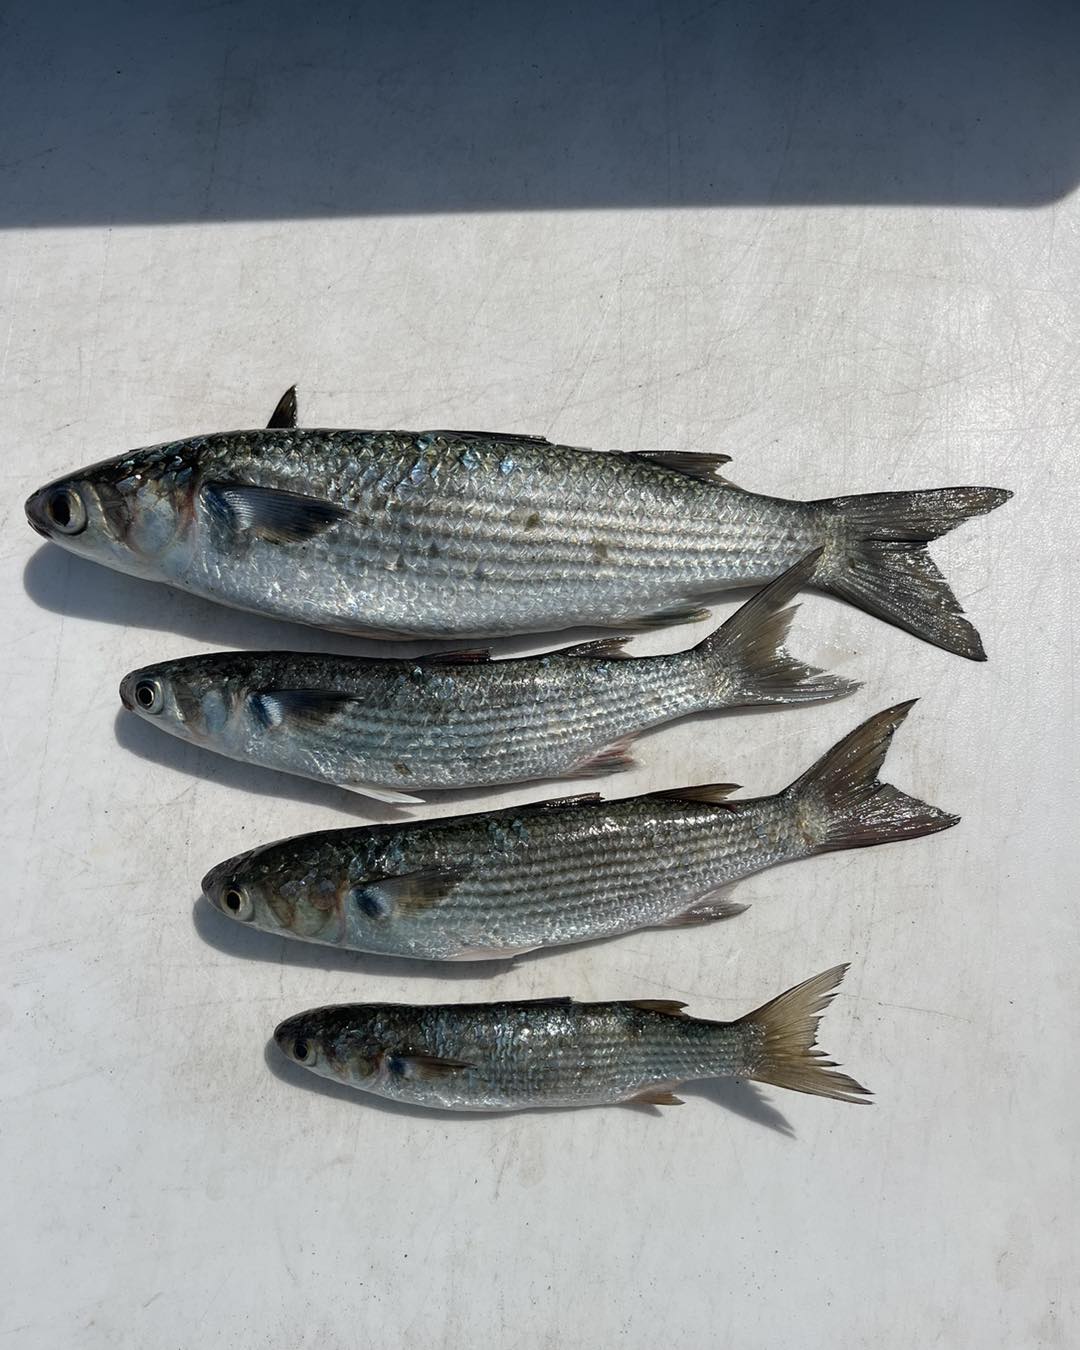 Captain Jot Owens' Southeastern North Carolina Fishing Report for